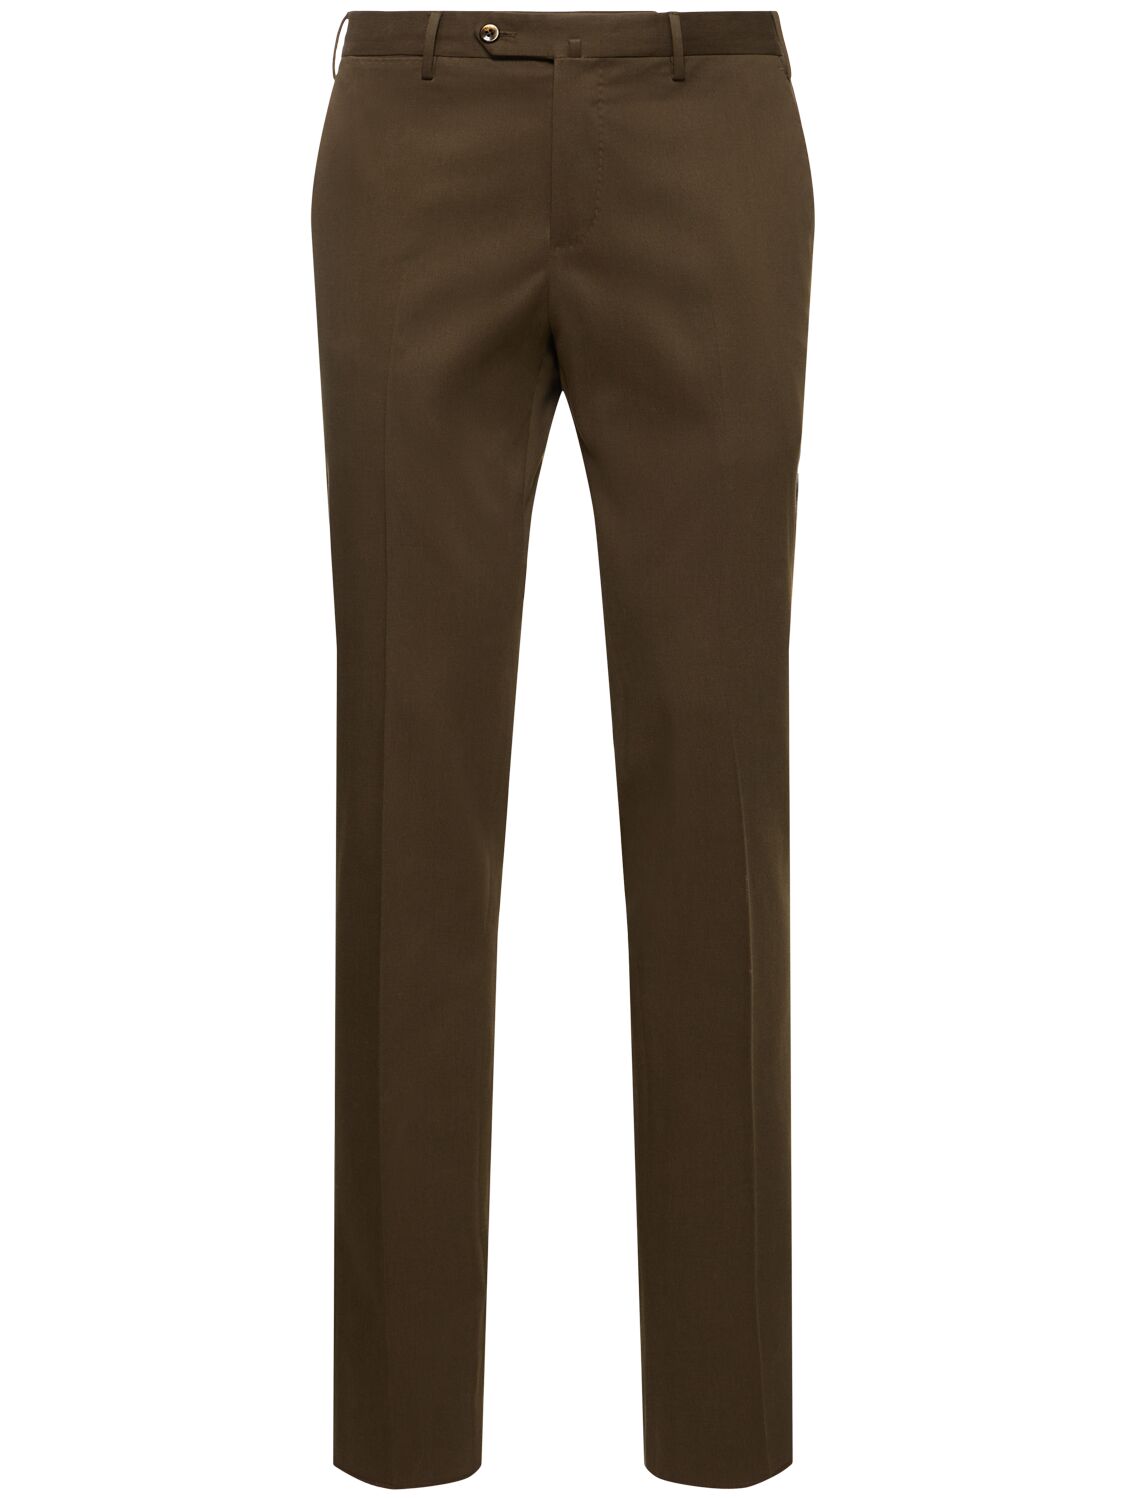 Pt Torino Classic Cotton Blend Straight Trousers In Olive Green